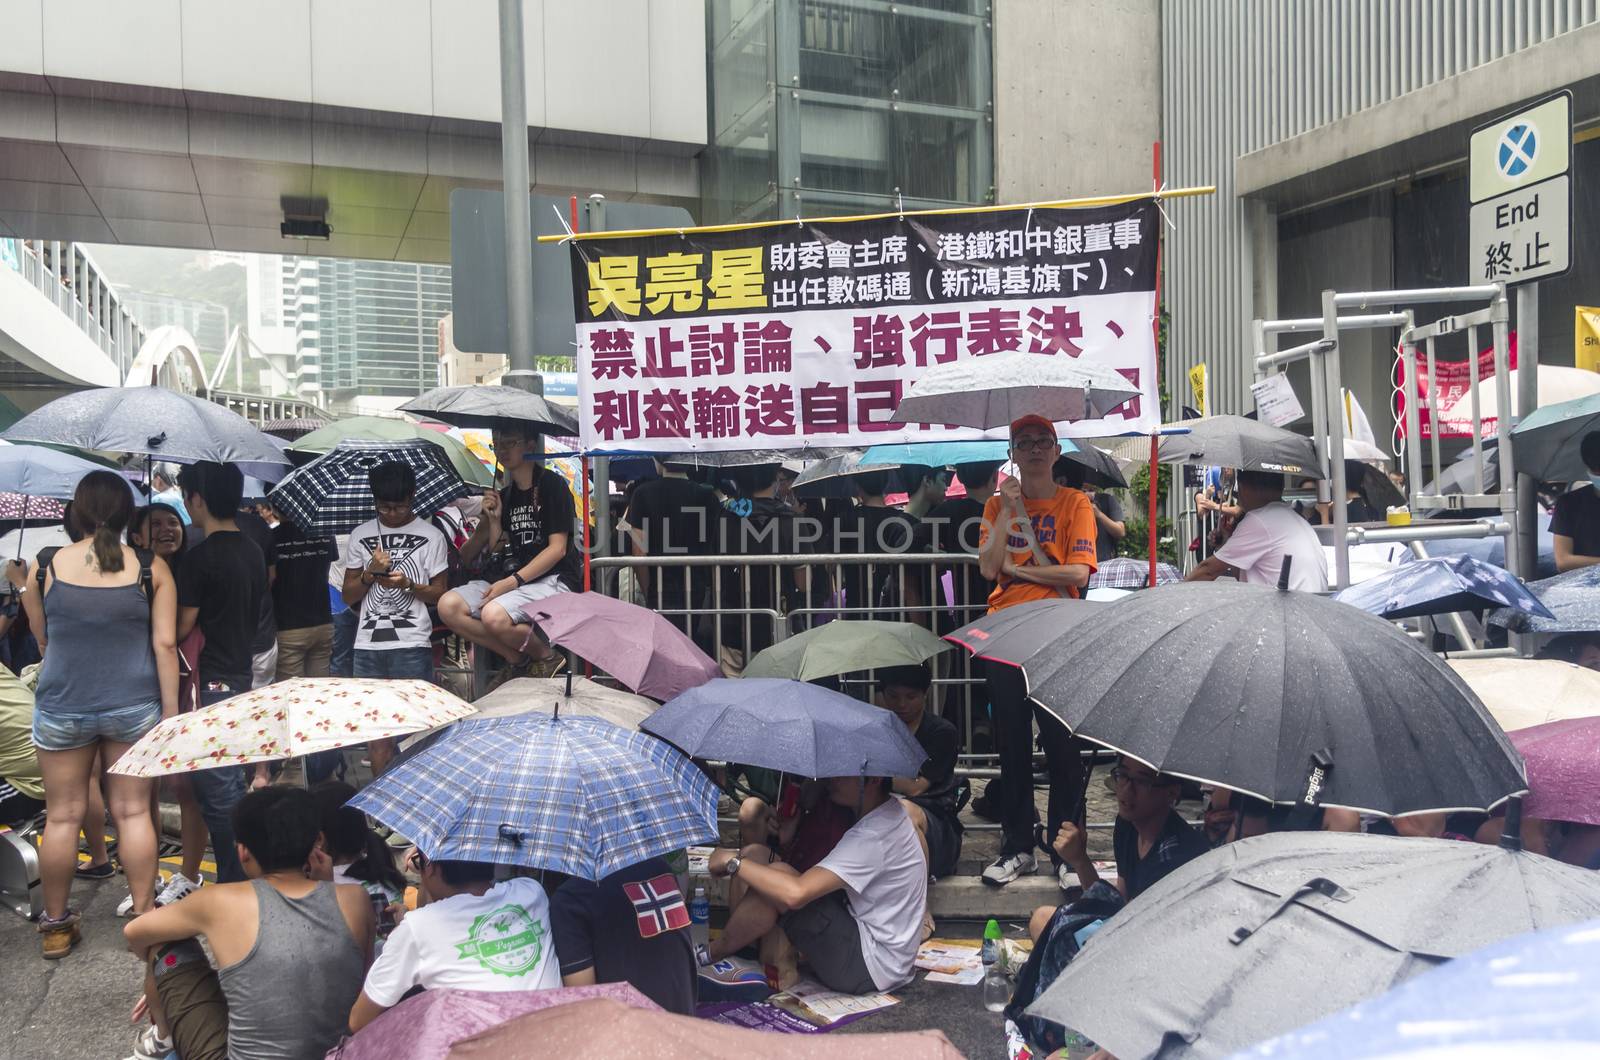 HONG KONG - JUNE 20: Protesters gathered outside the government headquarters on June 20, 2014 in Hong Kong. The Finance Committee is vetting a funding request about northeast New Territories.